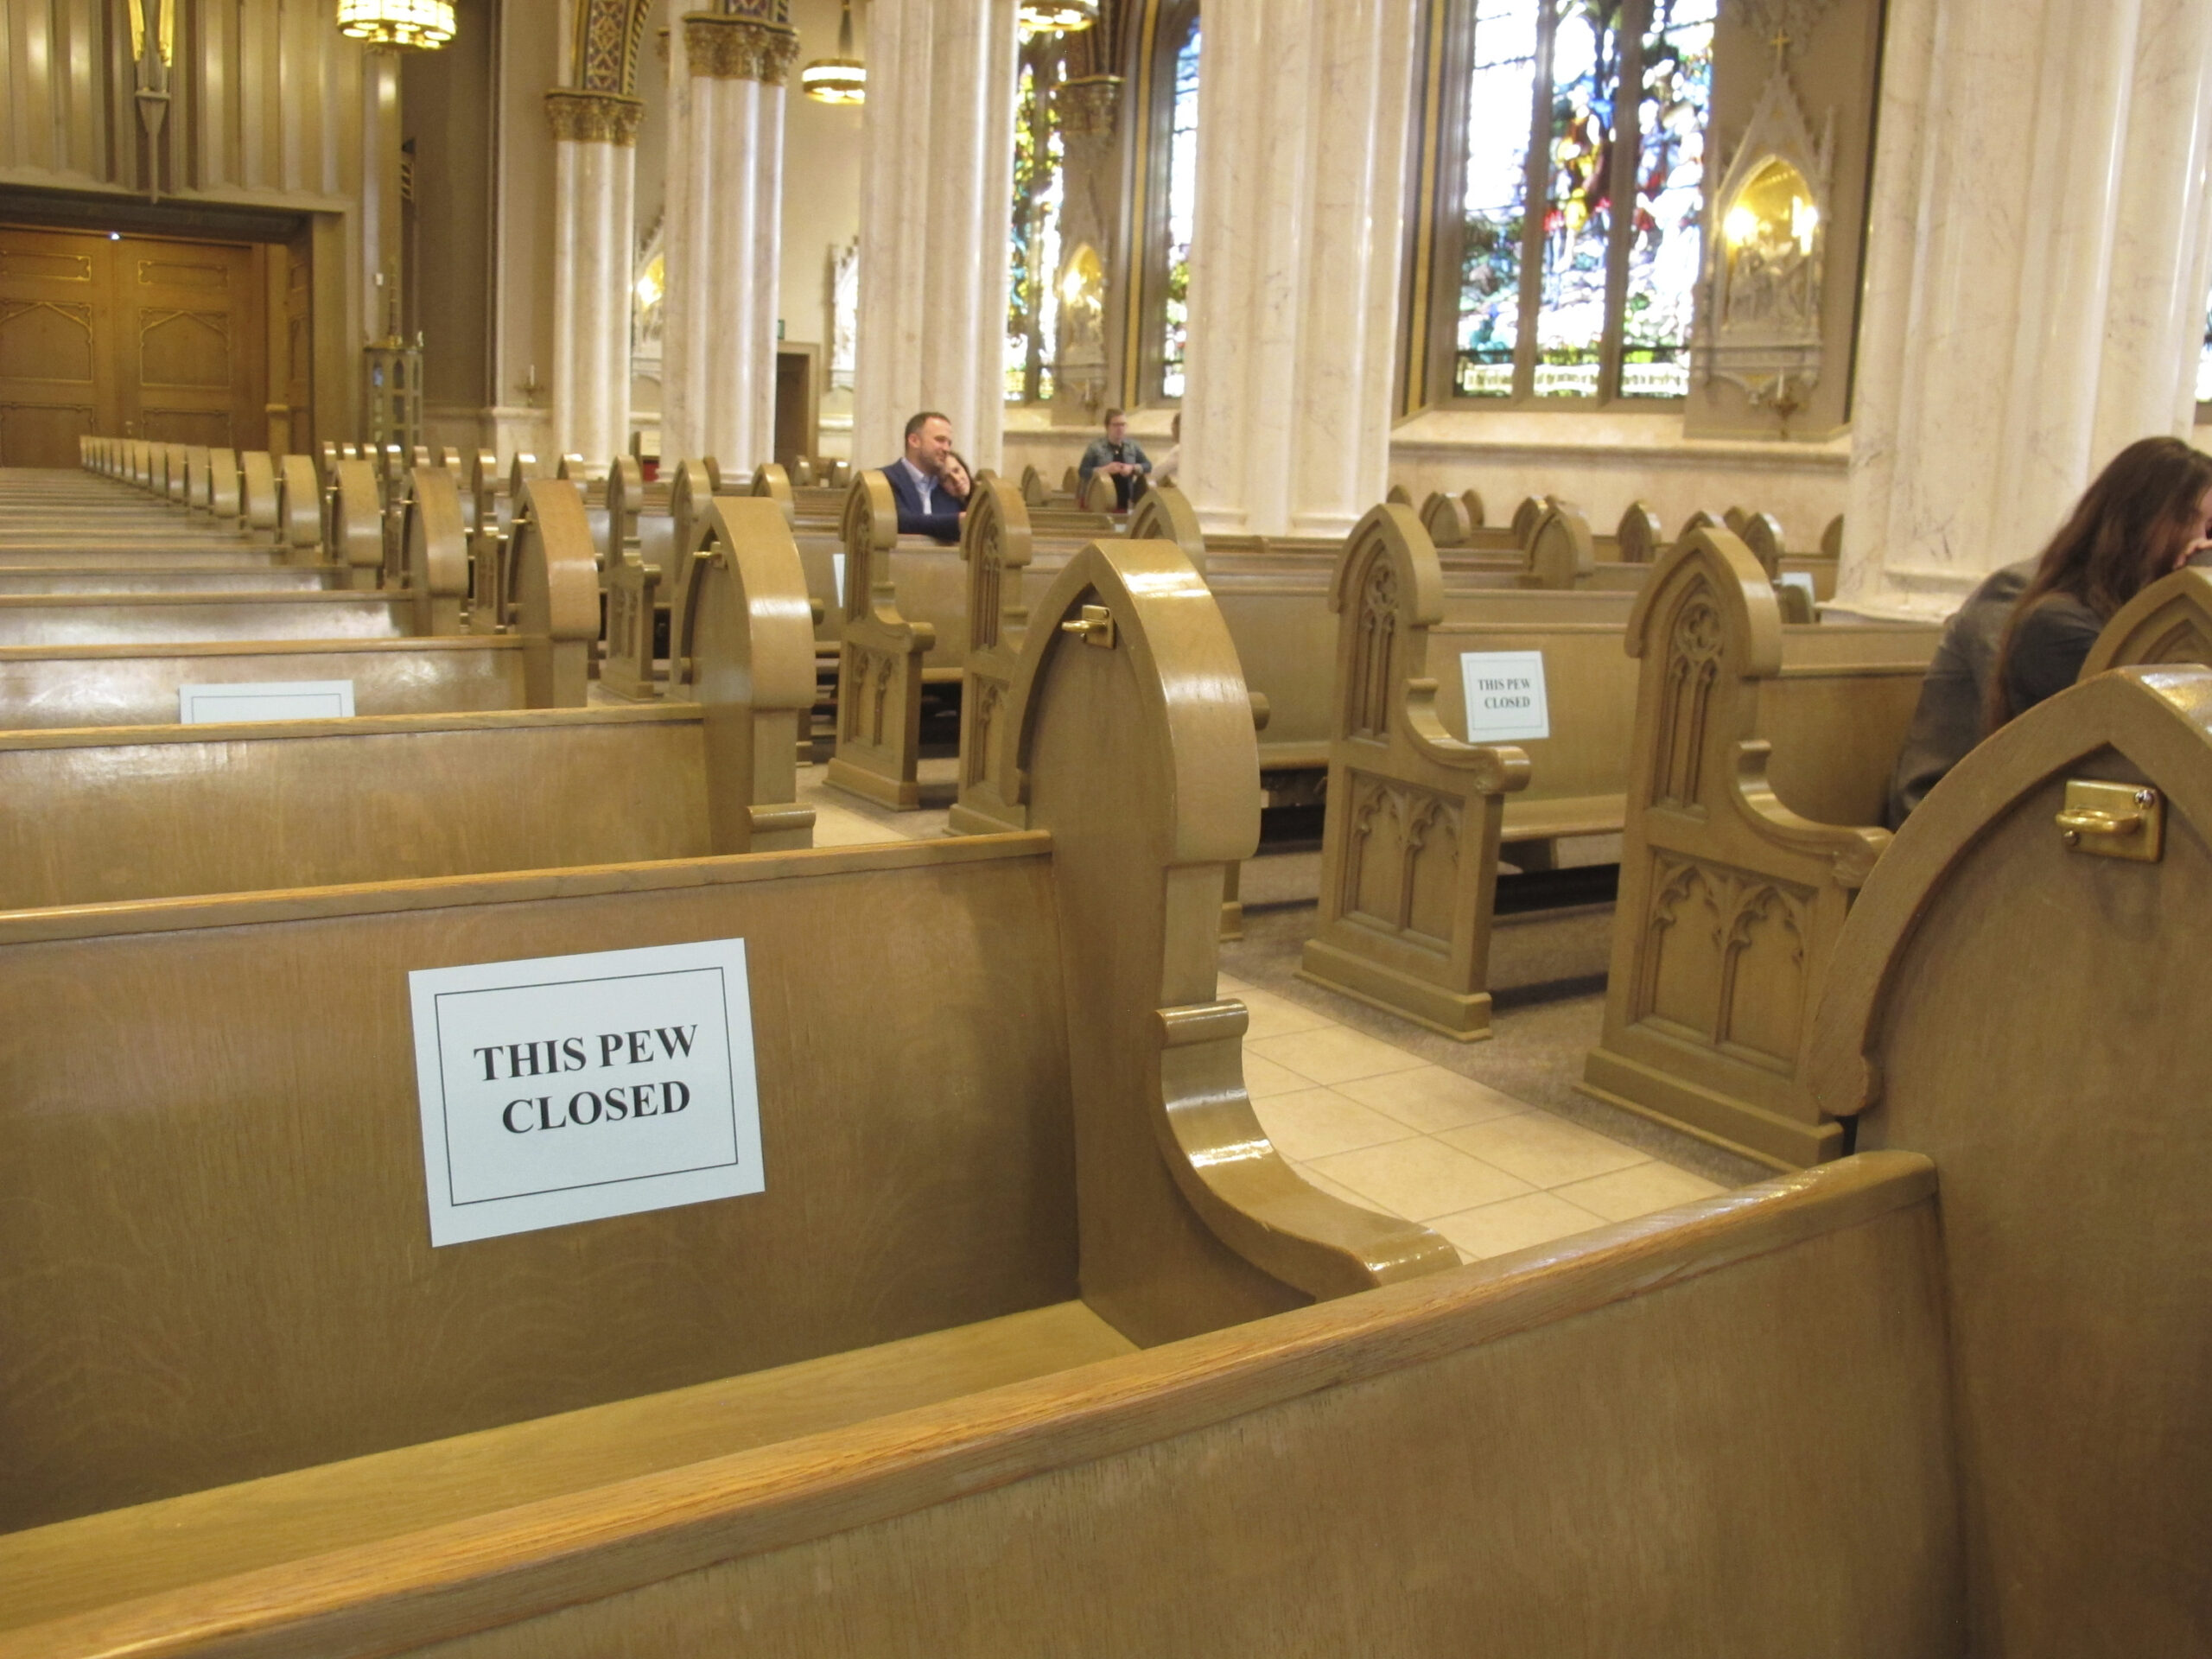 Half of the pews were closed to congregants as services resumed at the Cathedral of St. Helena